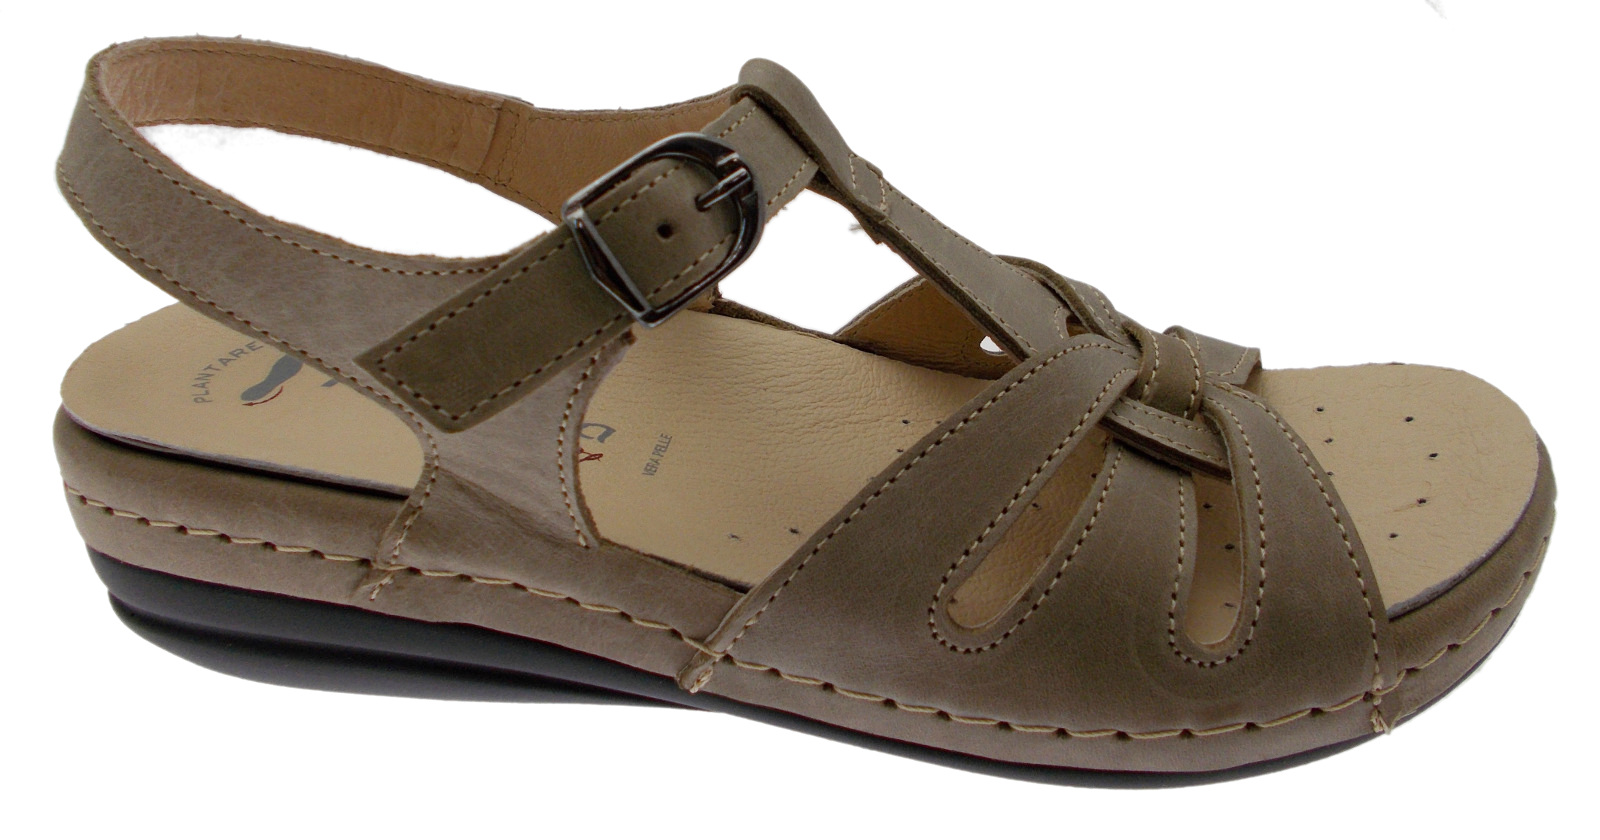 9514 taupe sandal with removable orthopedic insole Riposella | eBay